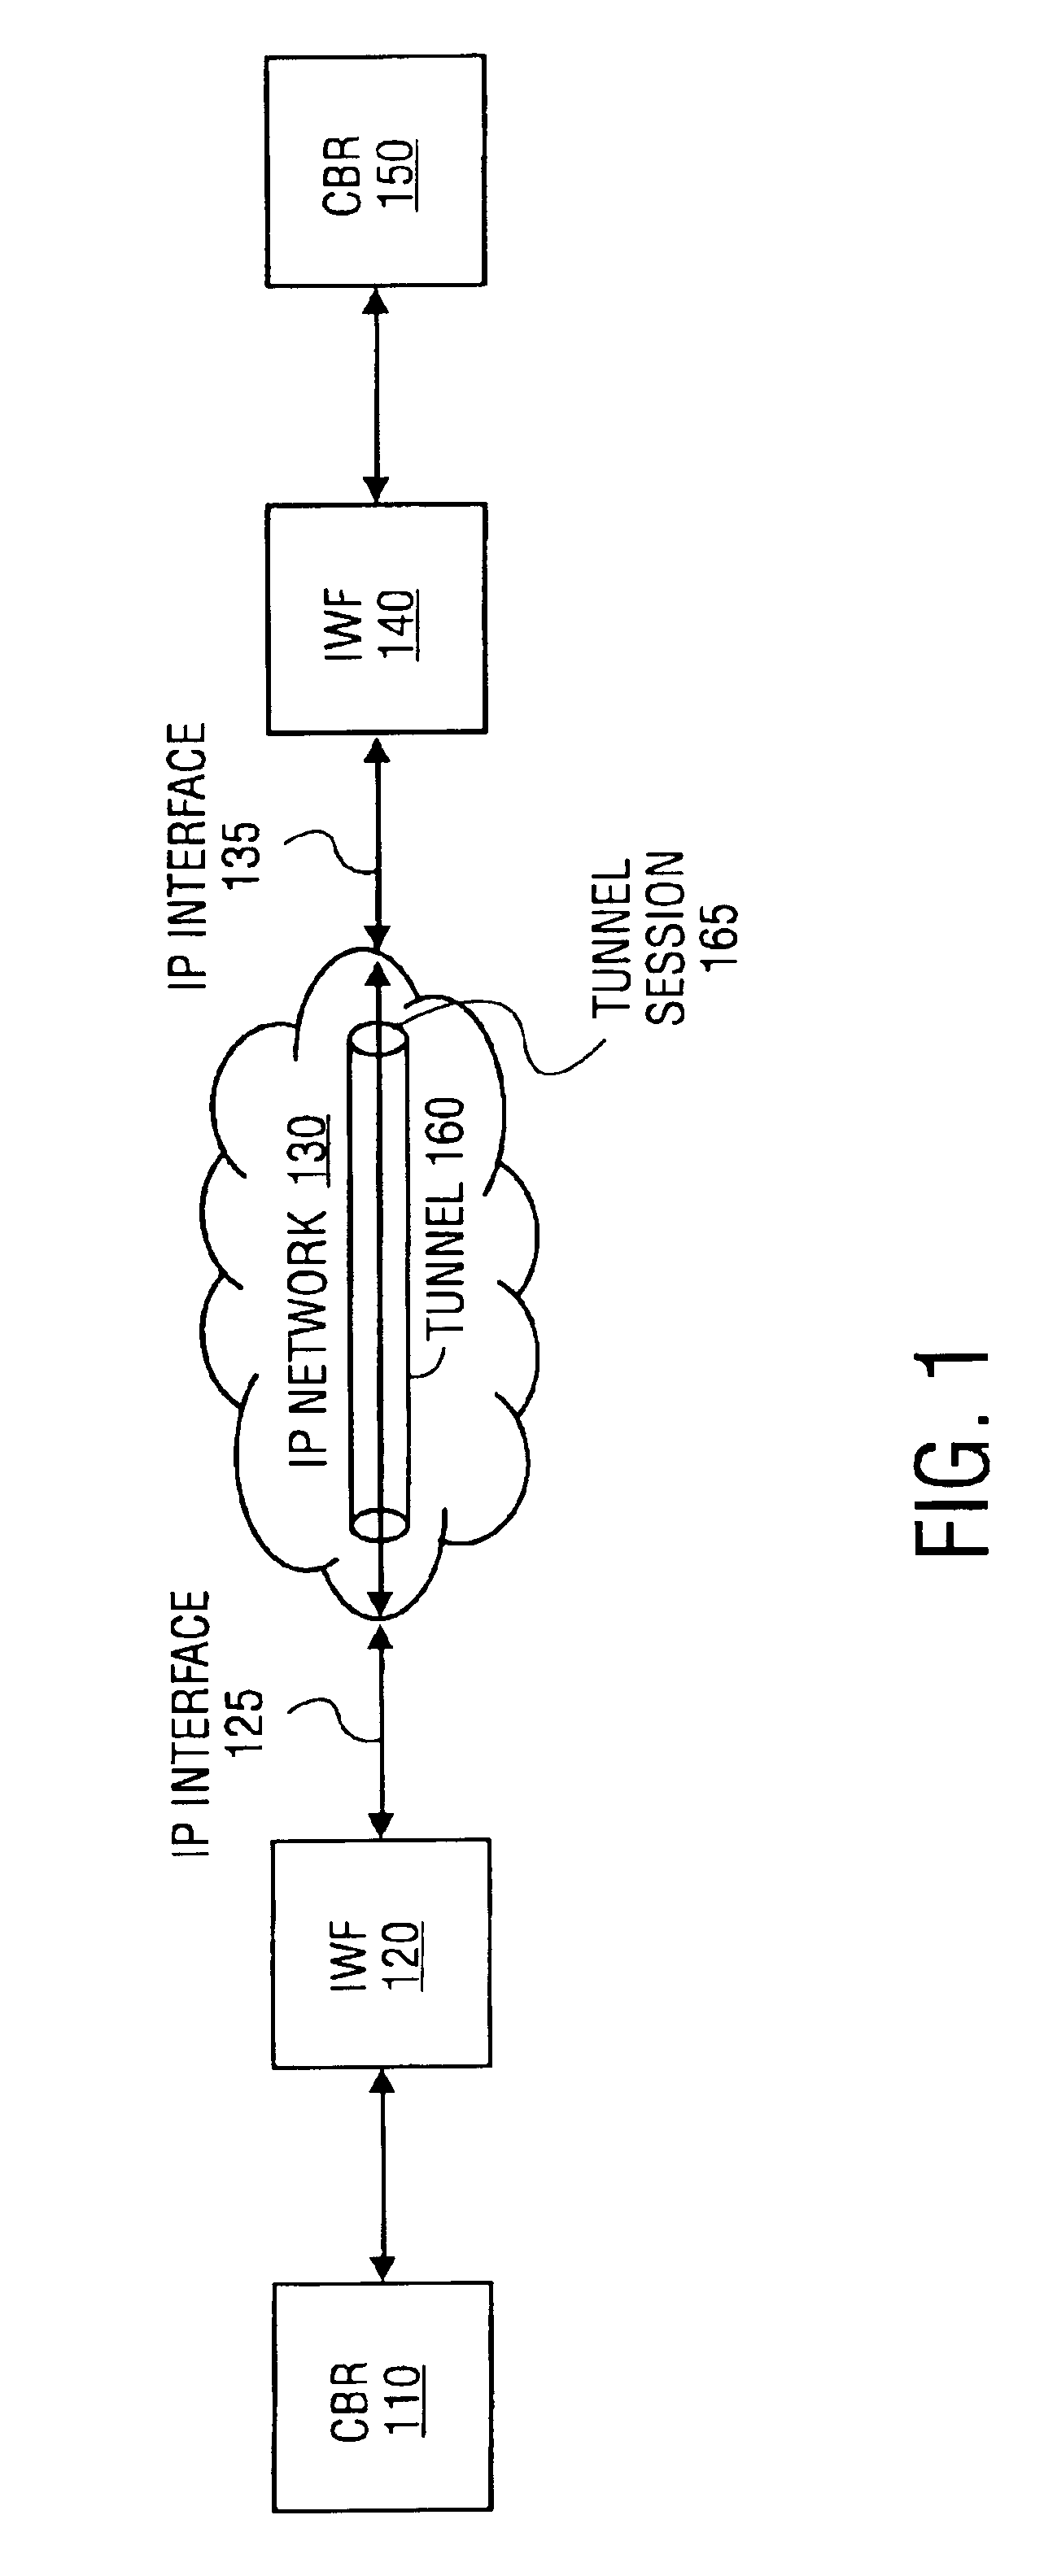 Circuit emulation service over an internet protocol network